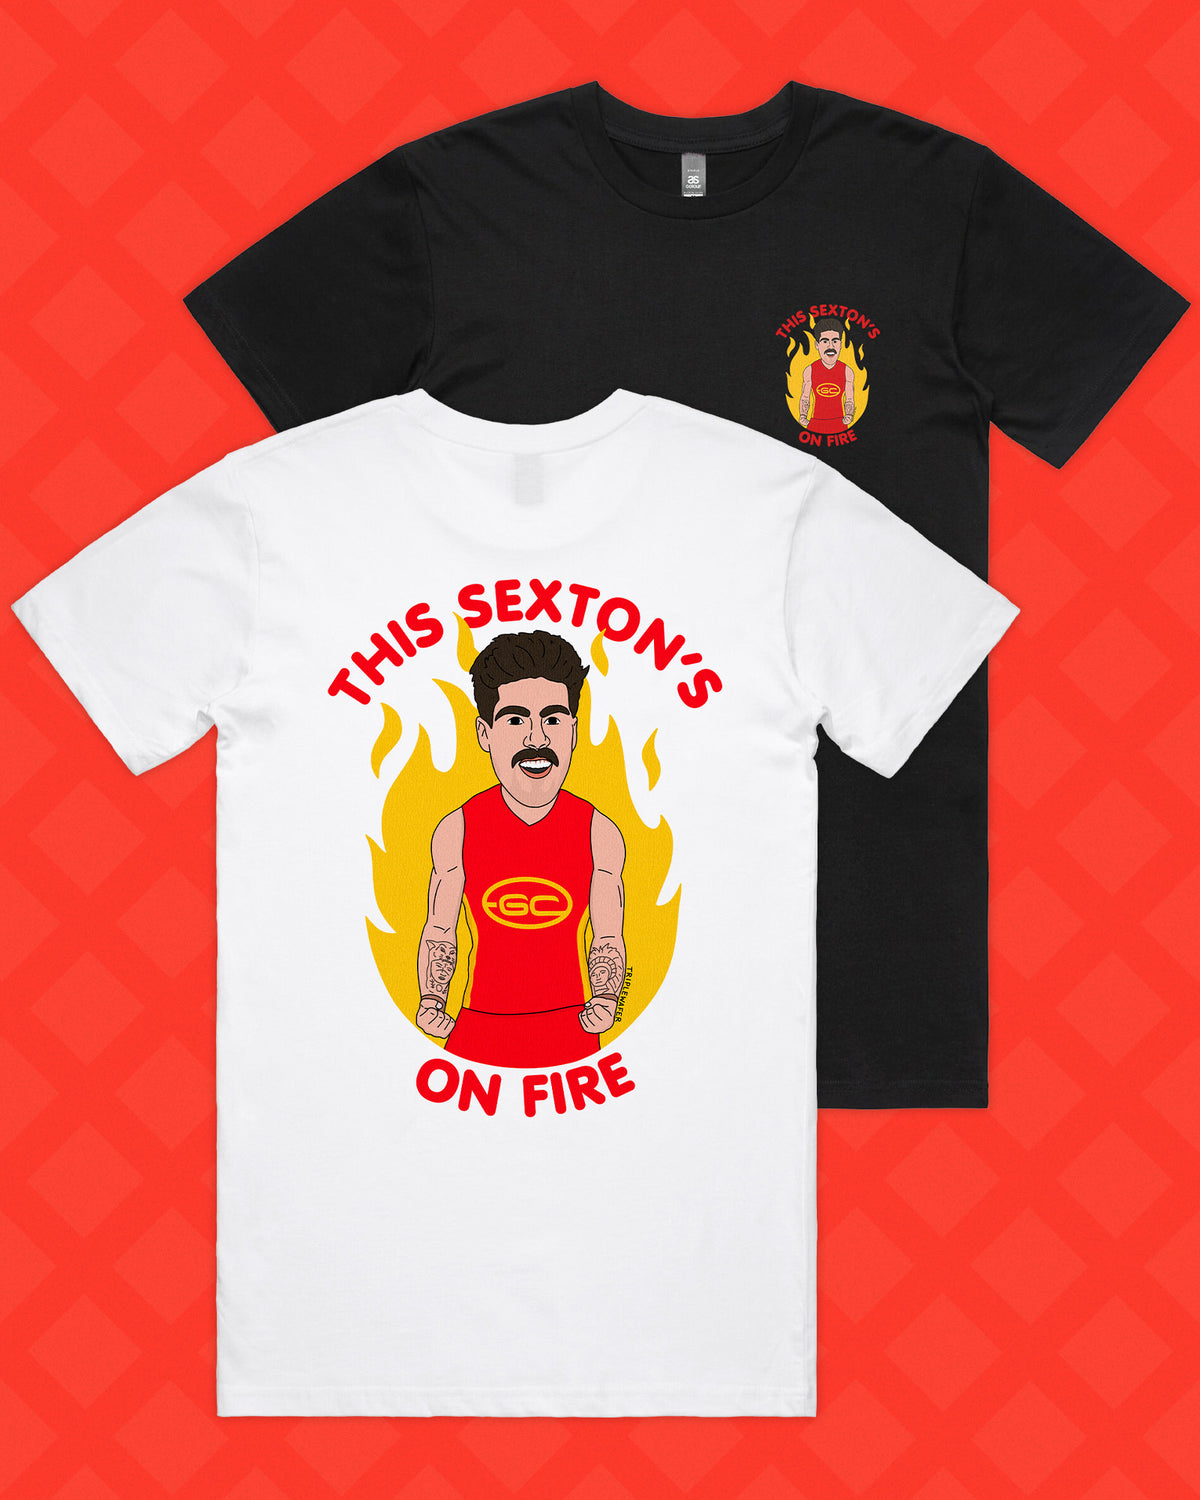 THIS SEXTON'S ON FIRE TEE